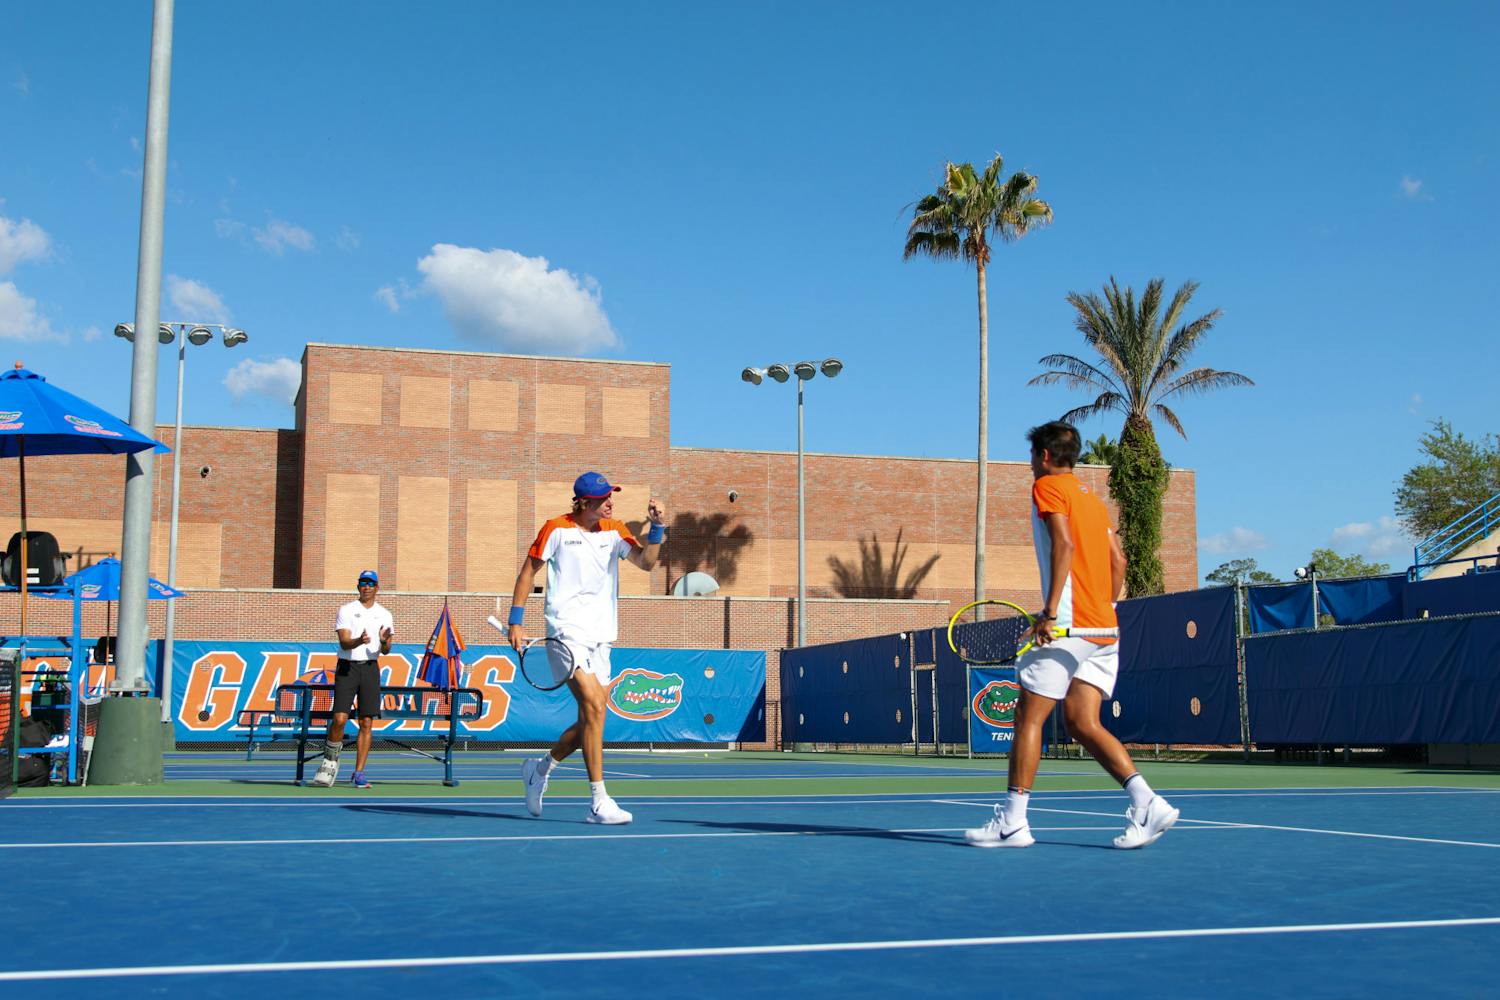 Florida sophomore Nate Bonetto and freshman Tanapatt Nirundorn compete in their doubles match during the Gators' men's tennis match game against the Arkansas Razorbacks Friday, March 24, 2023.